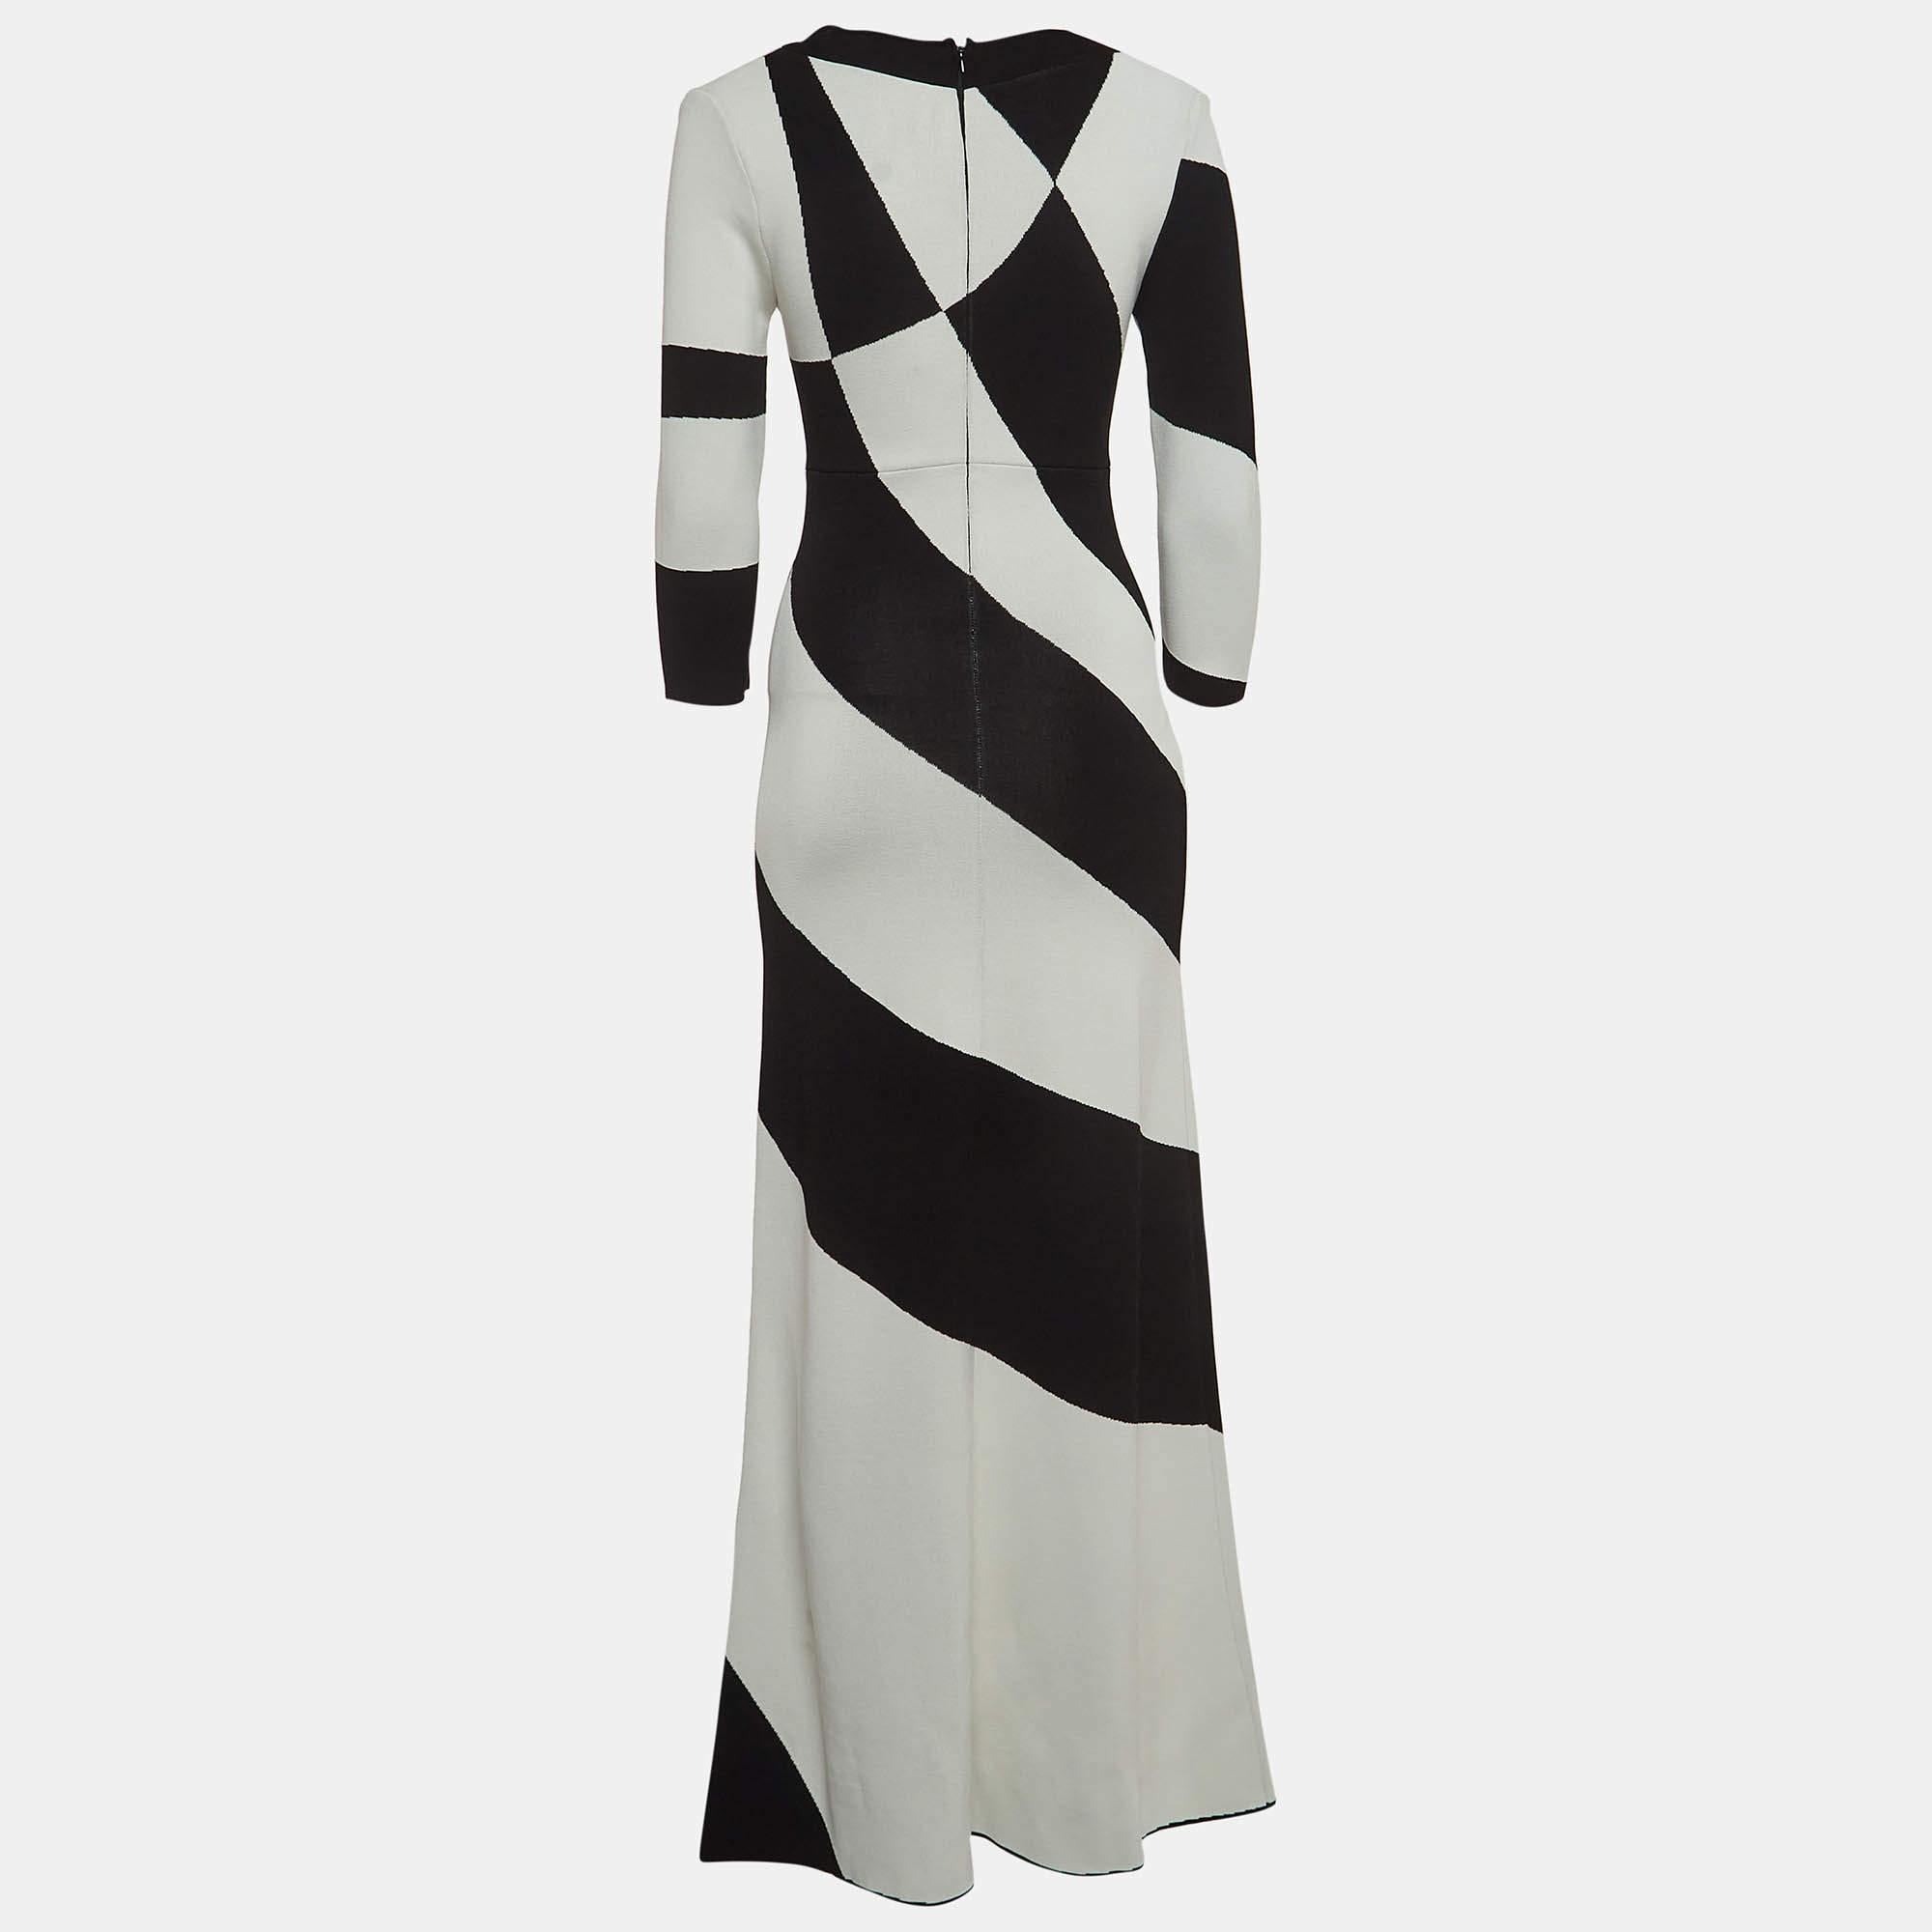 The Ramzen dress is a chic and timeless piece, featuring a flattering A-line silhouette with stripes. Crafted from soft knit fabric, it offers comfort and style. The monochromatic palette adds a classic touch, making it suitable for various